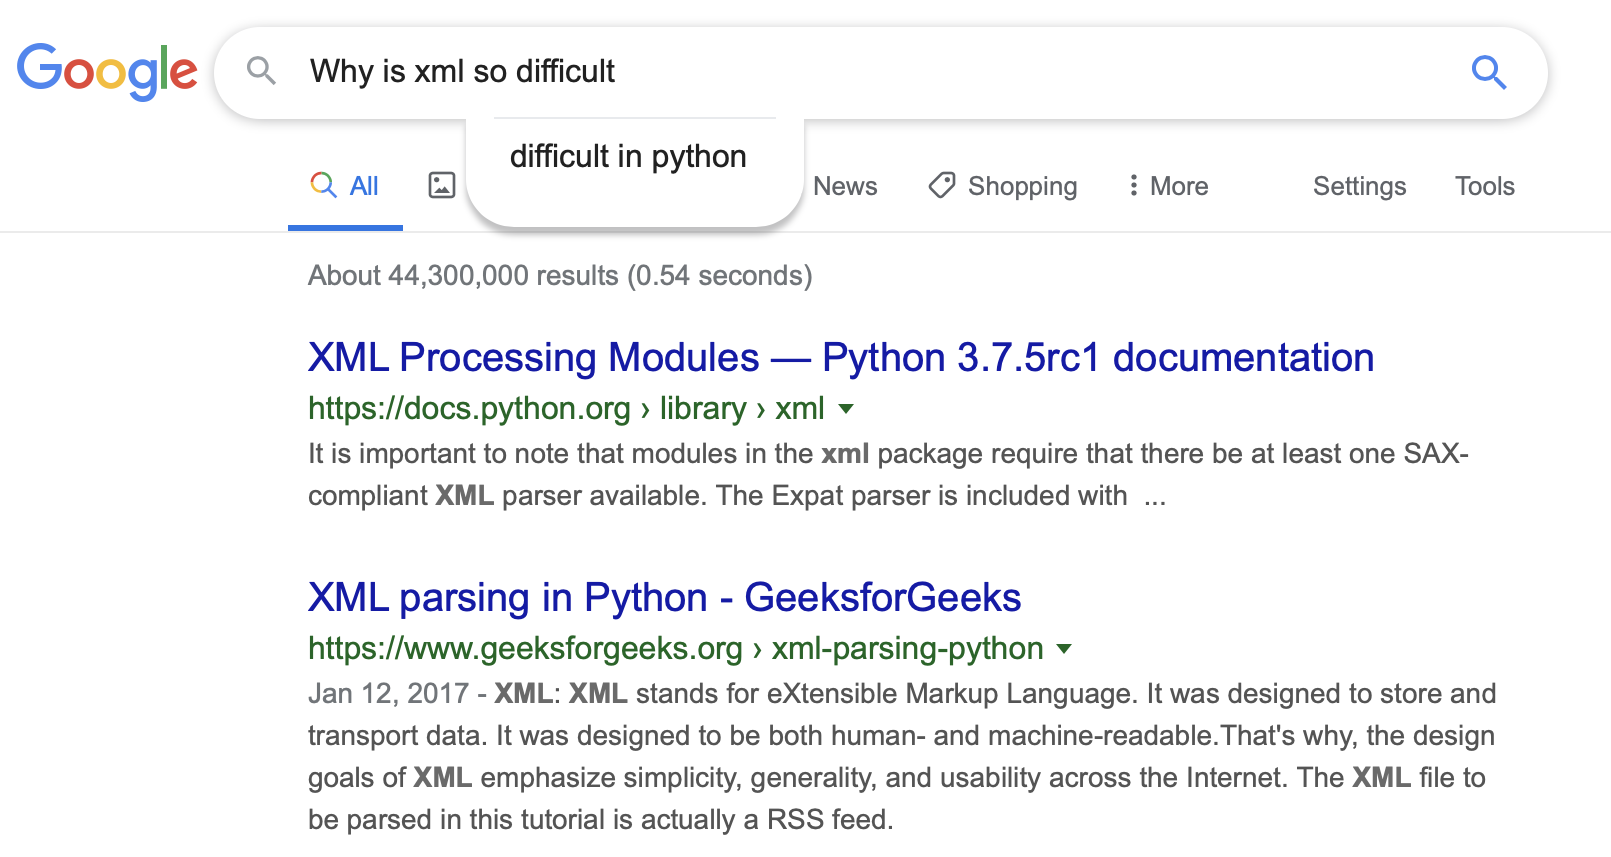 Why is XML so difficult in Python?